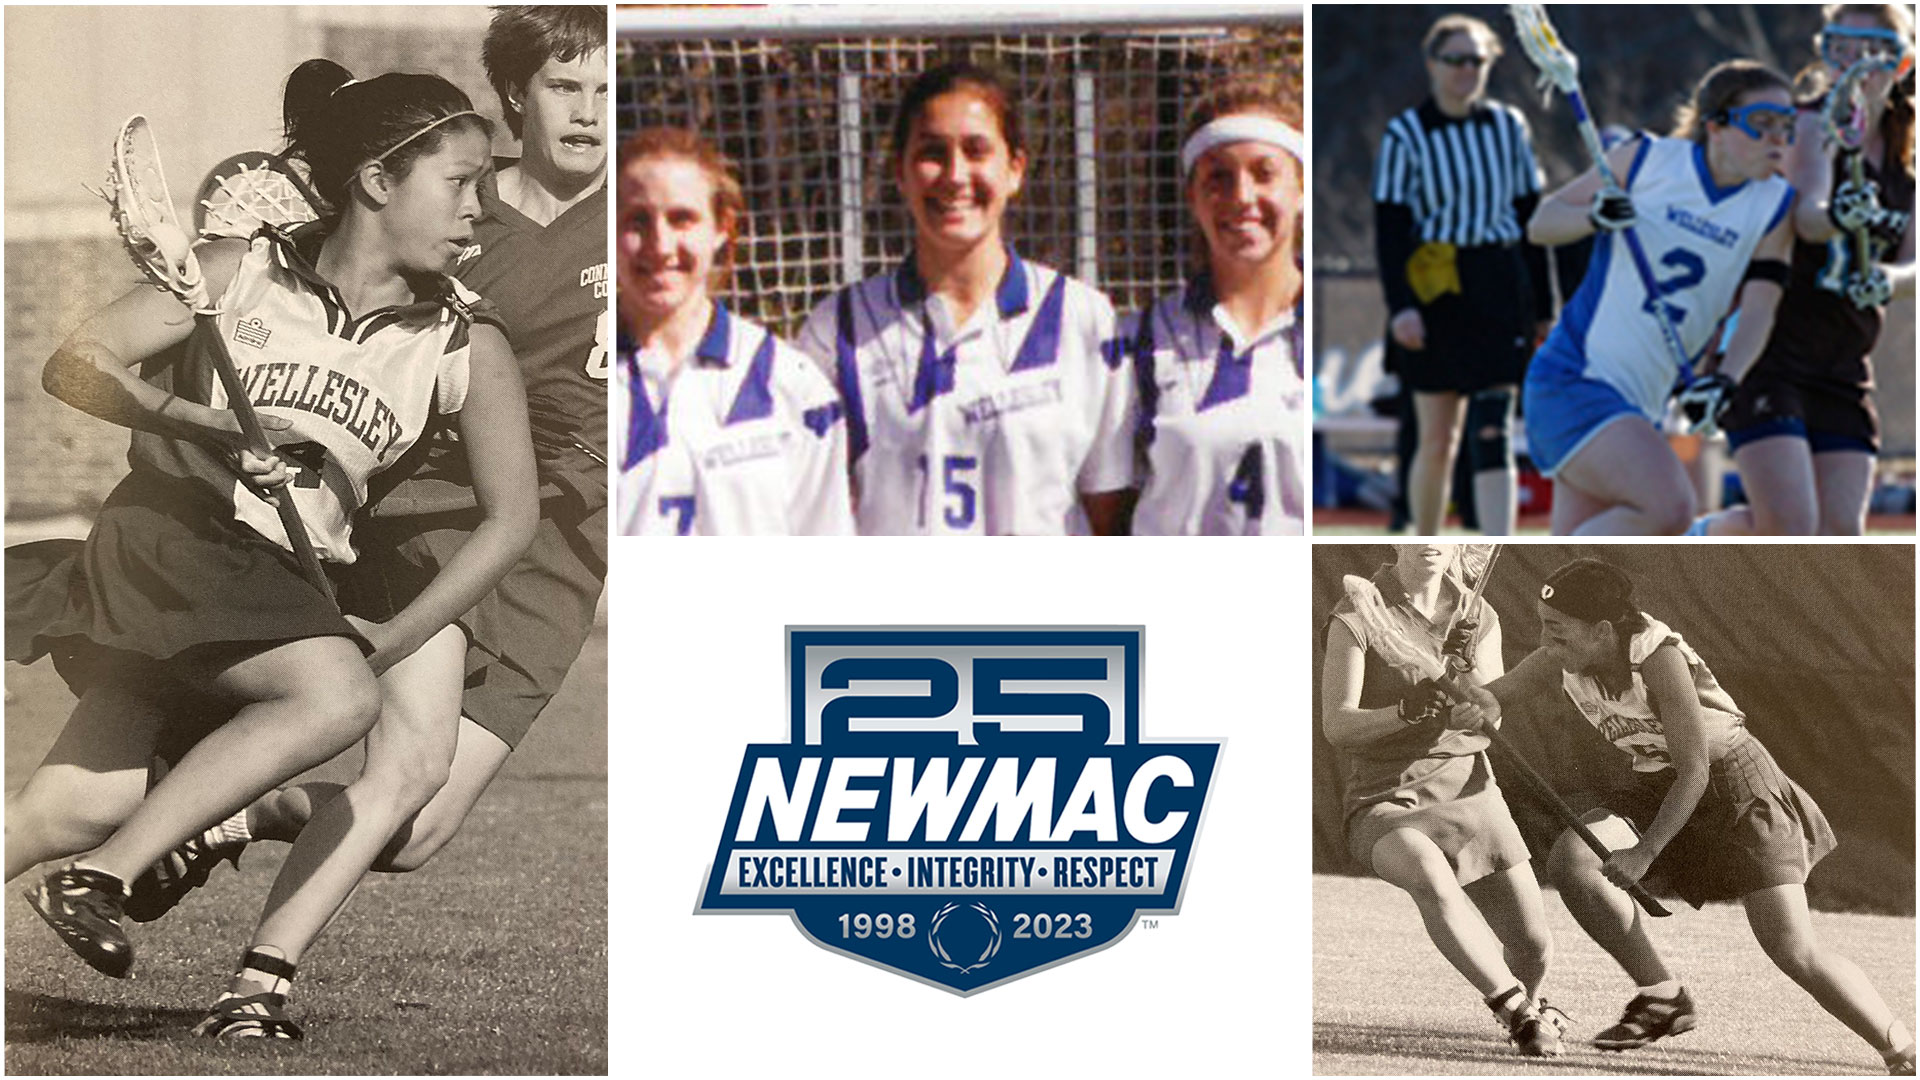 Wellesley lacrosse had four student-athletes make the 25 Year All-NEWMAC Women's Lacrosse Team. Left to right: Grace Tsan '03, Kate Armenta '01, Loretta White '10 (top), Claudia Veritas '02 (bottom)